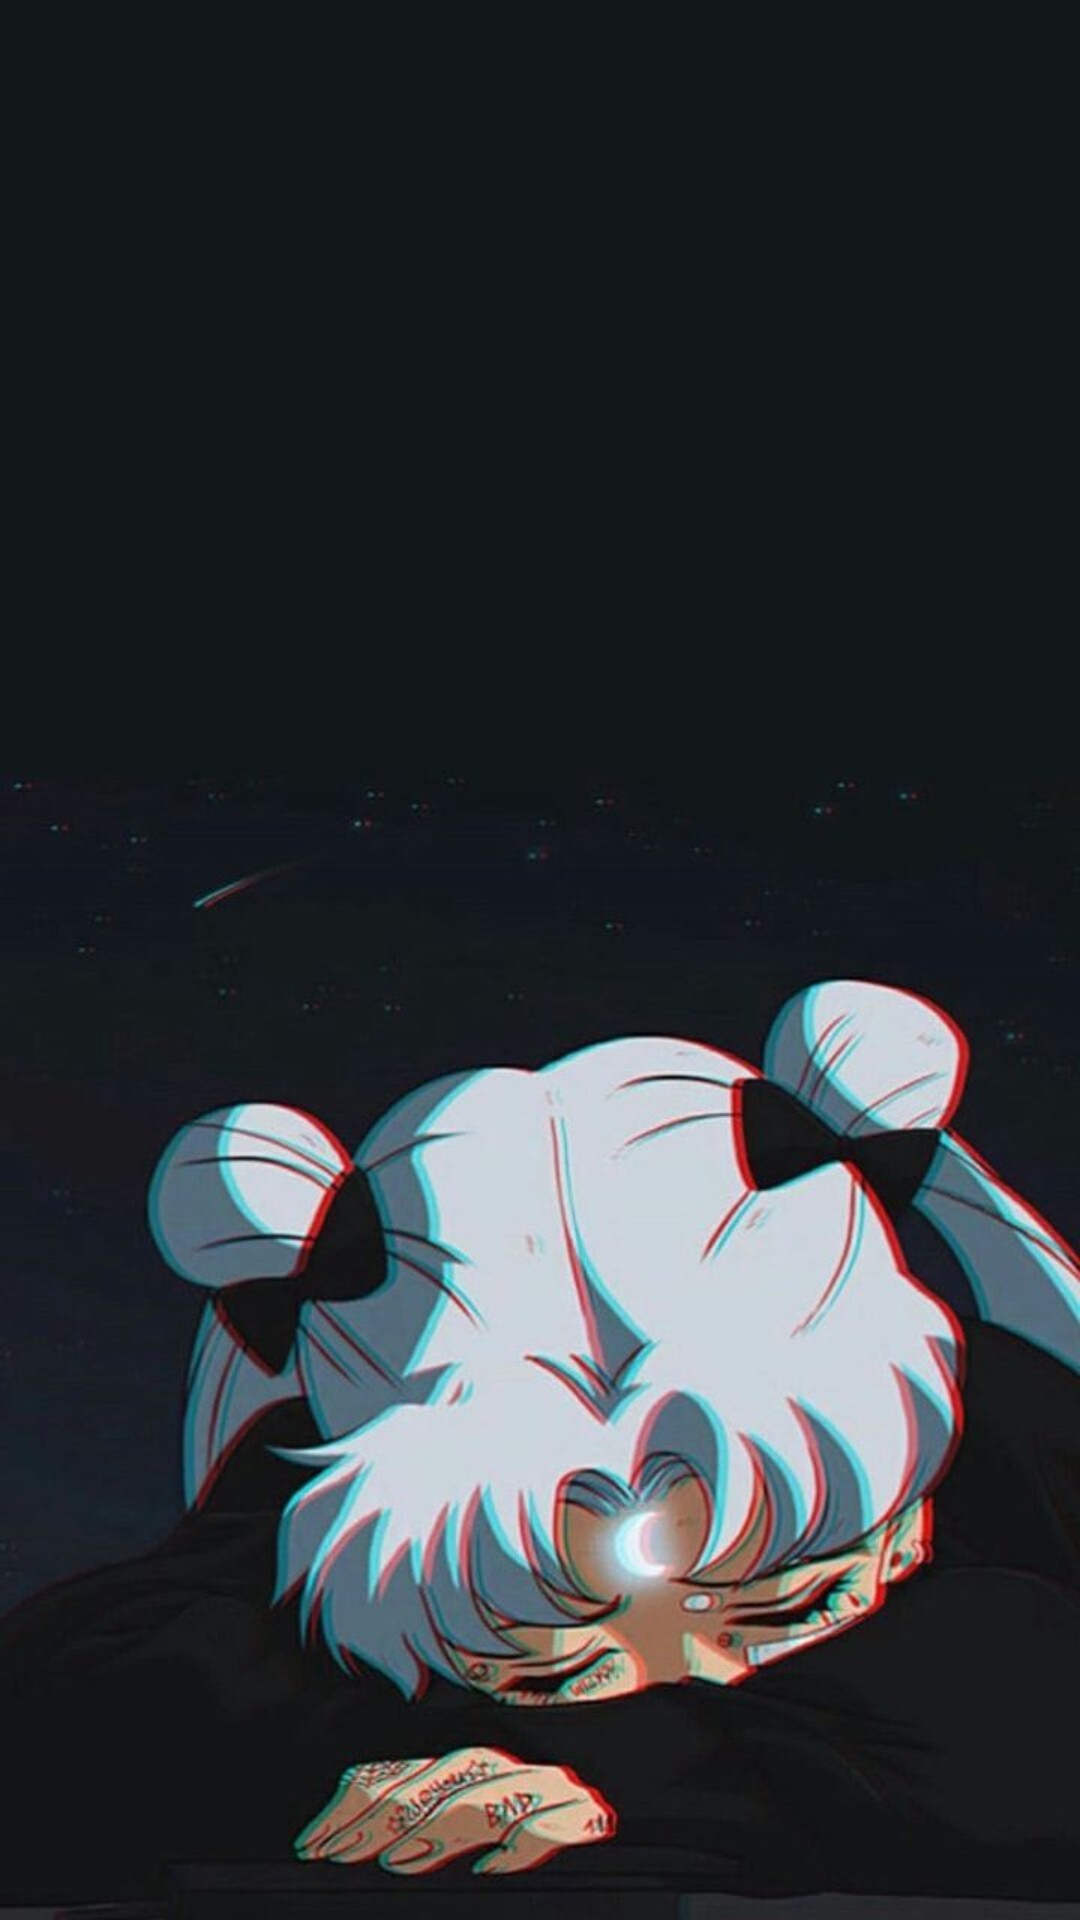 4K Anime Iphone Wallpapers